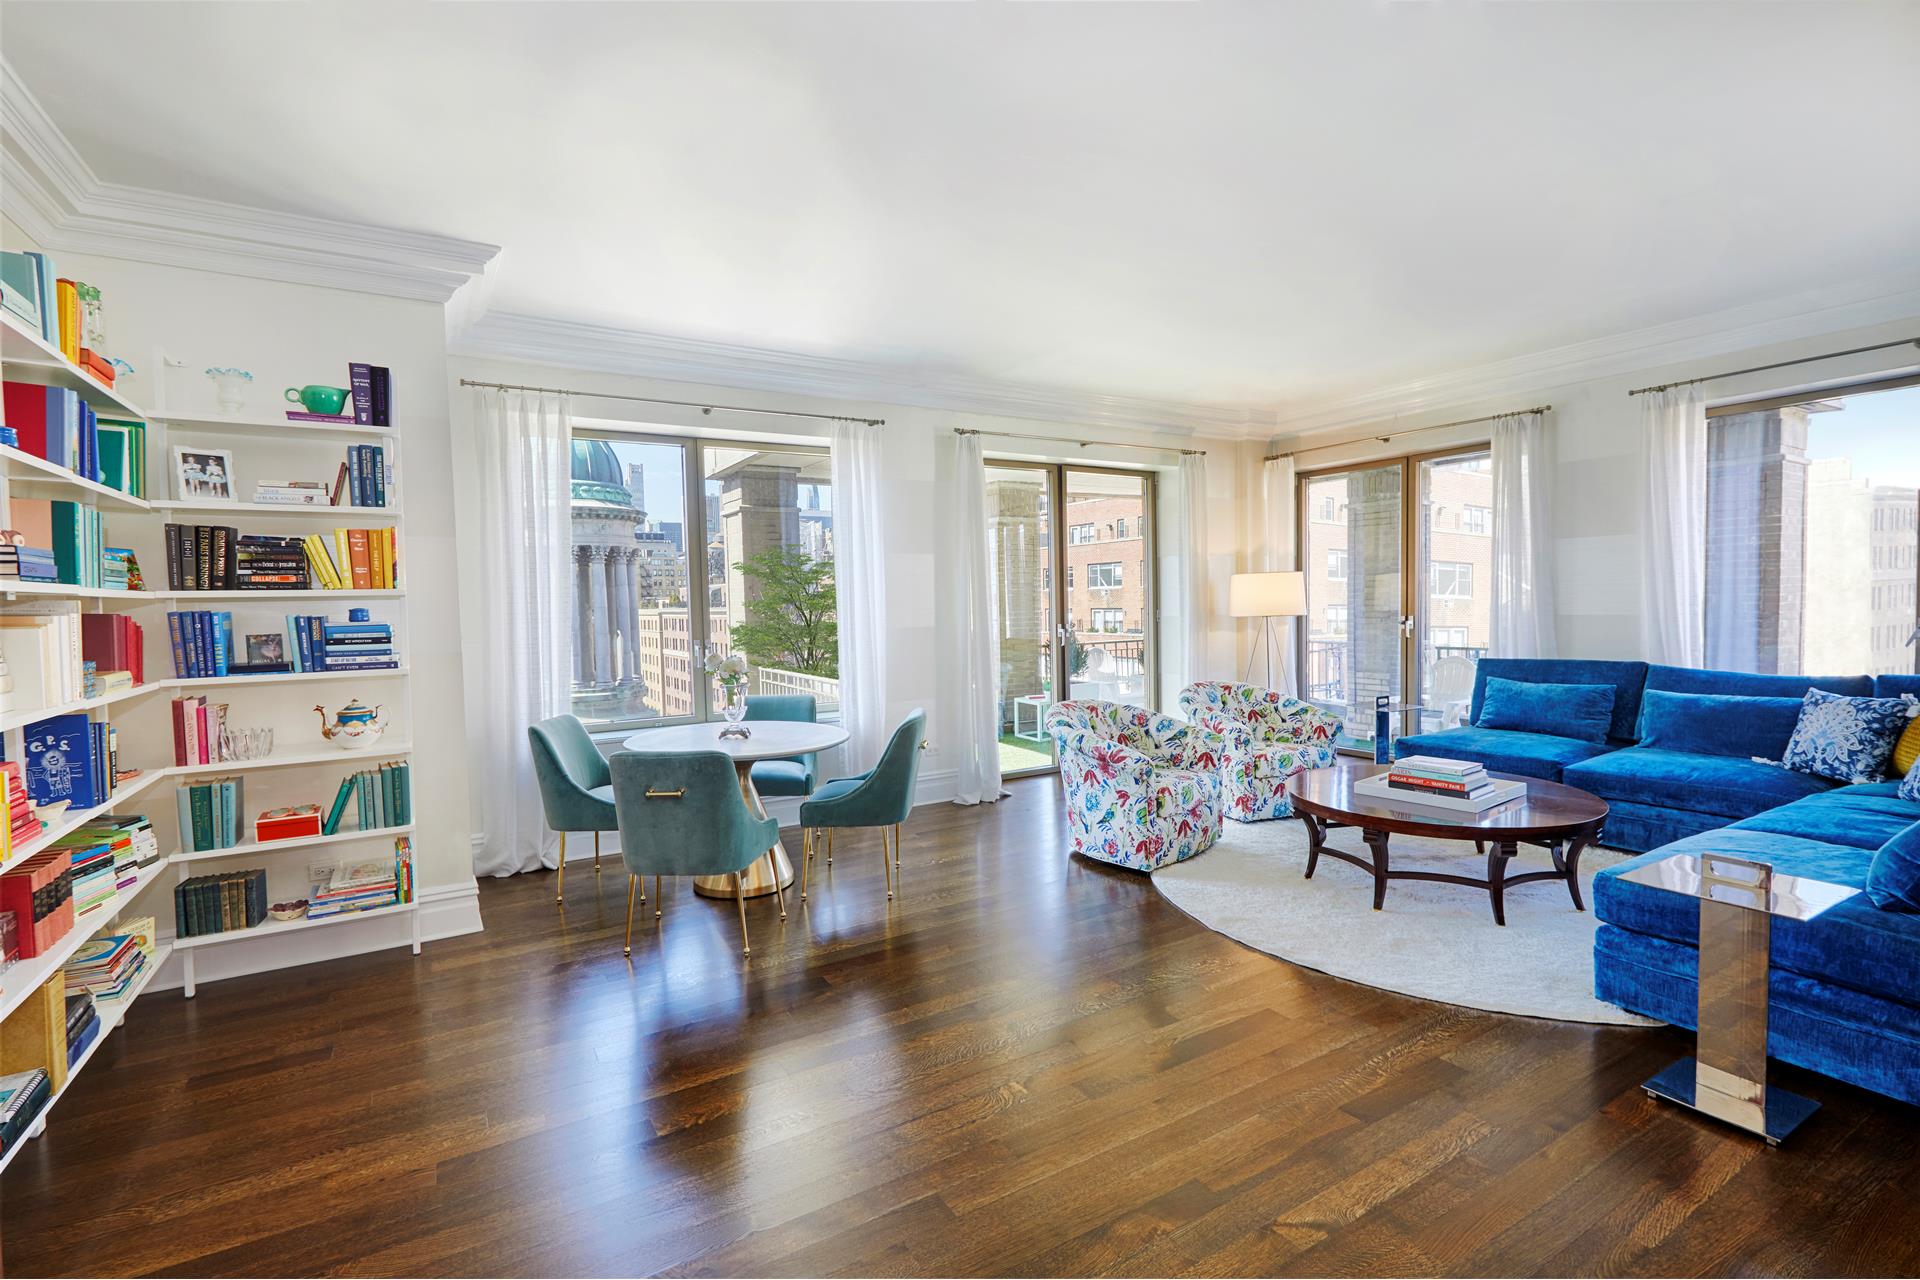 145 East 76th Street 11, Lenox Hill, Upper East Side, NYC - 5 Bedrooms  
4.5 Bathrooms  
10 Rooms - 